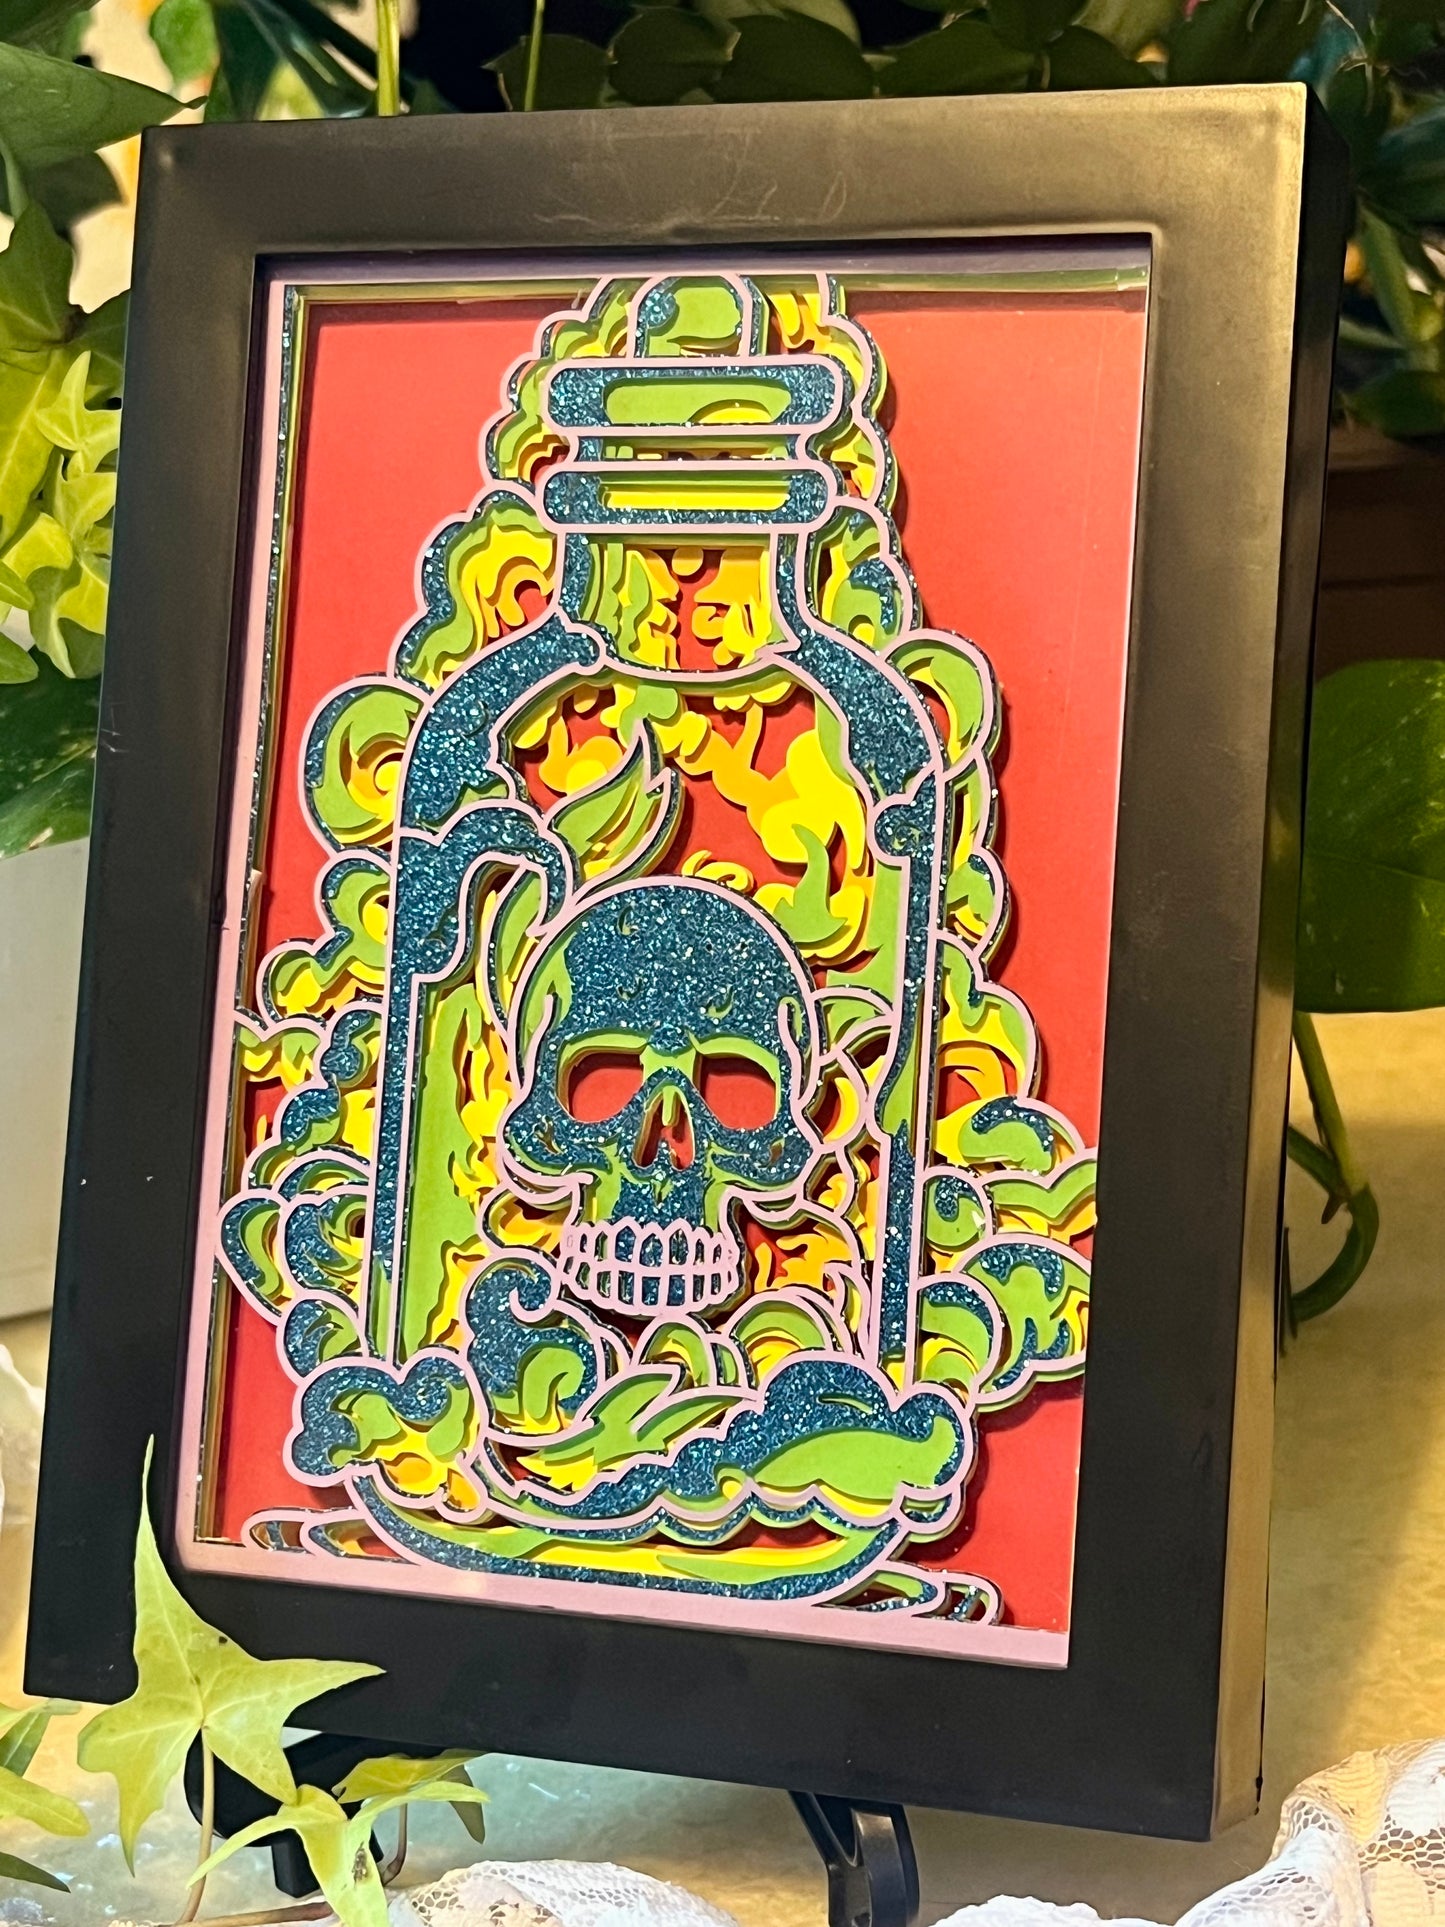 Skull in Apothecary Jar, Shaowbox, Layered Cut Paper Artwork, Framed 5x7